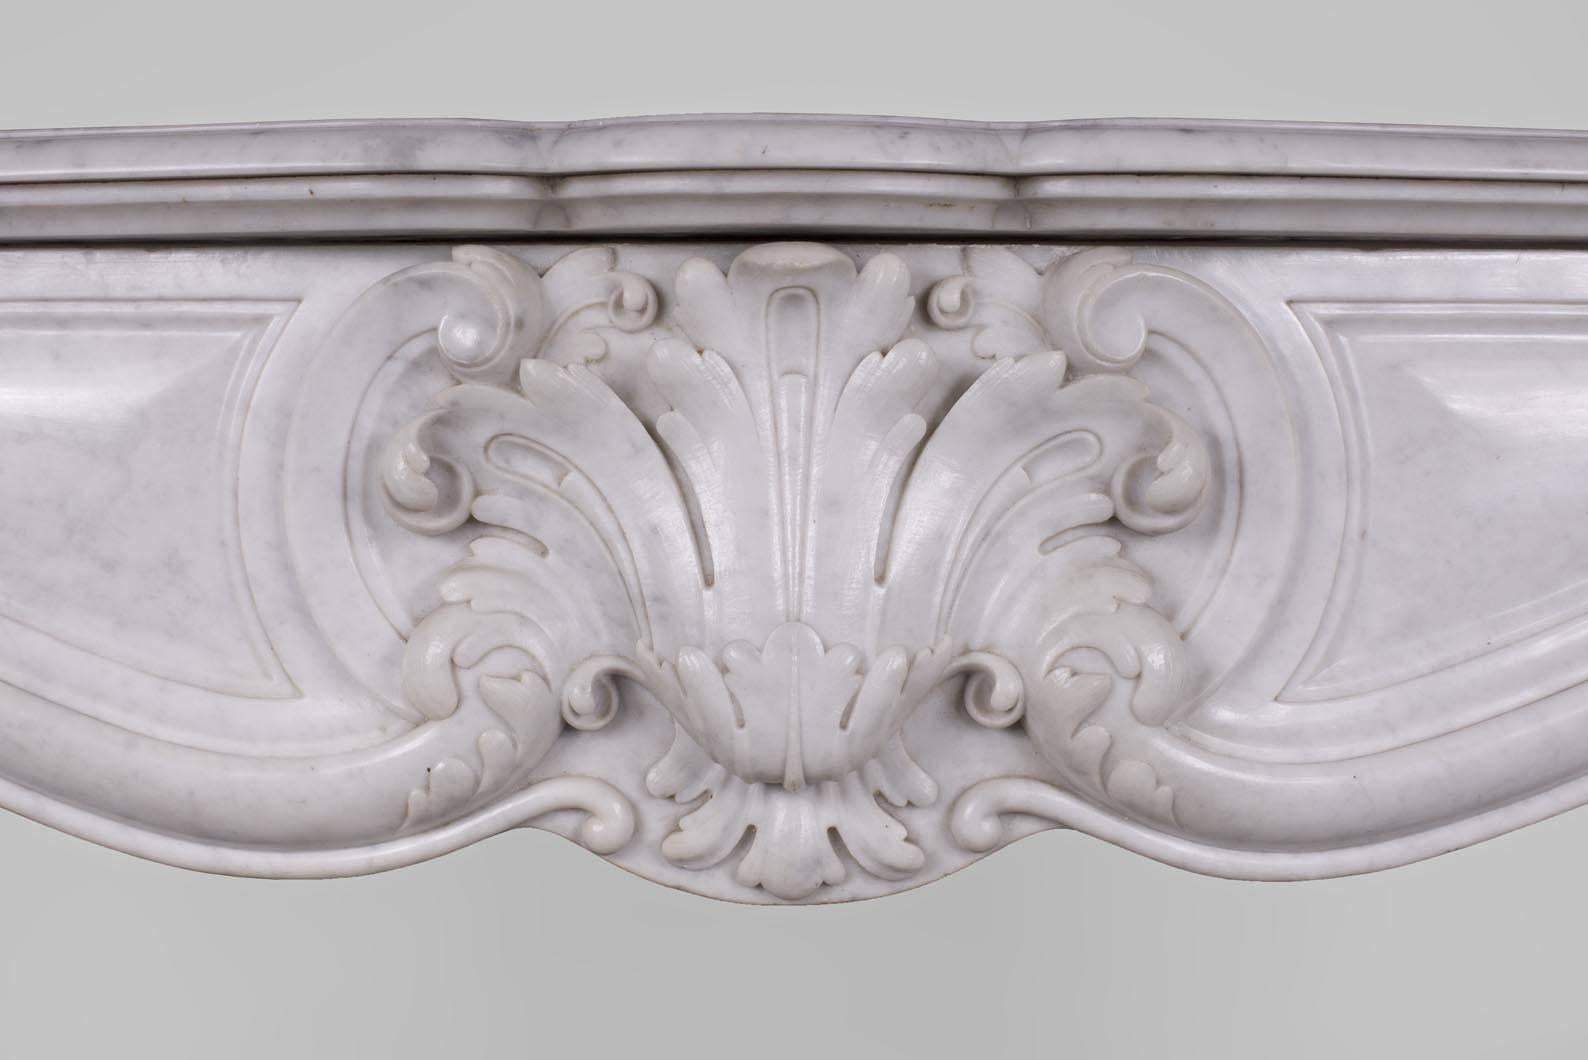 This beautiful antique Louis XV style fireplace richly decorated was made in the 19th century in a white Carrara marble. The winding jambs feature acanthus leaves at the feet and shells at the top. They support a curved frieze where medallions are